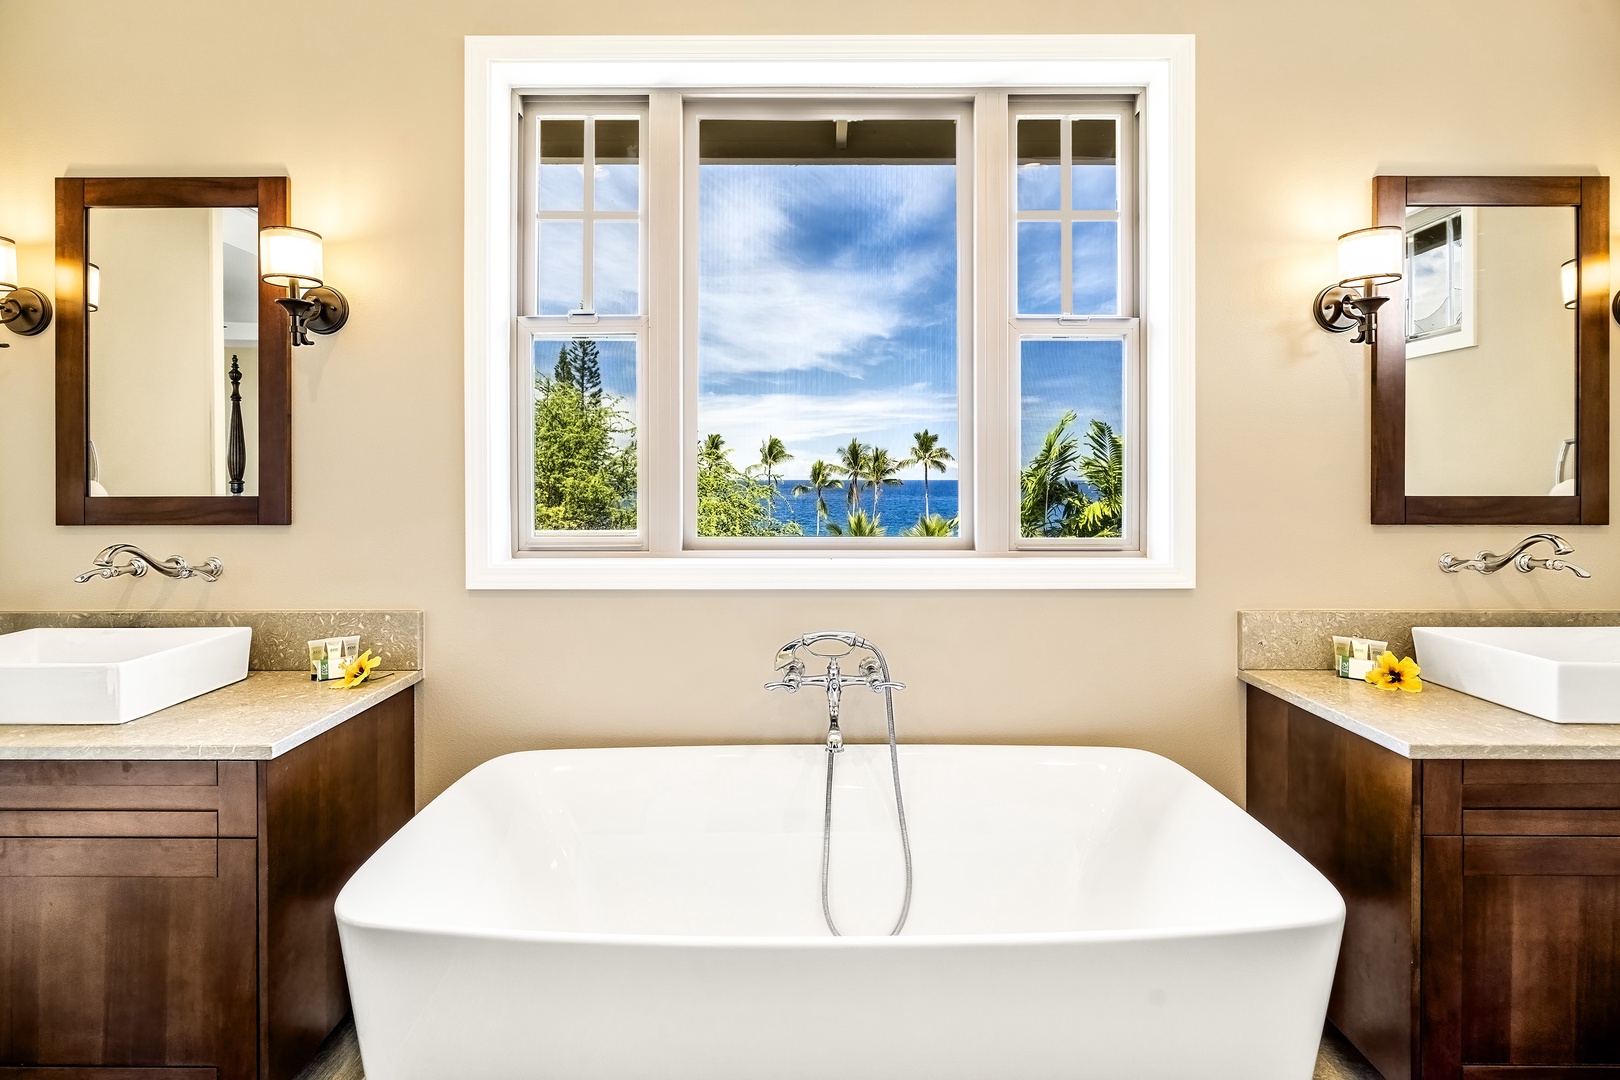 Kailua Kona Vacation Rentals, Golf Green - Soak in the tub while taking in the views!